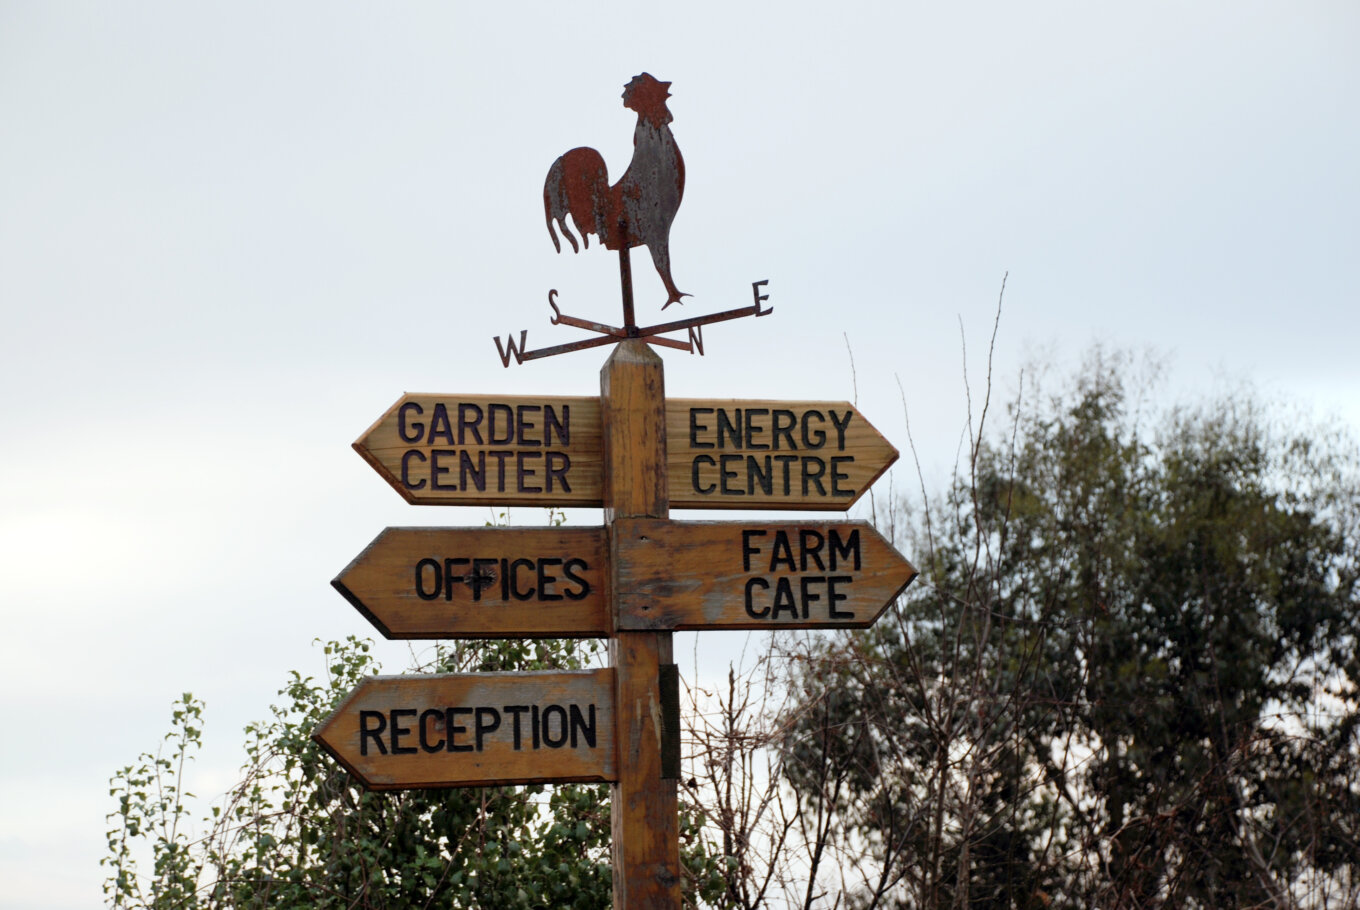 Wooden signs pointing to the cafe, garden centre, energy centre, offices and reception, with a cut-out rooster on top